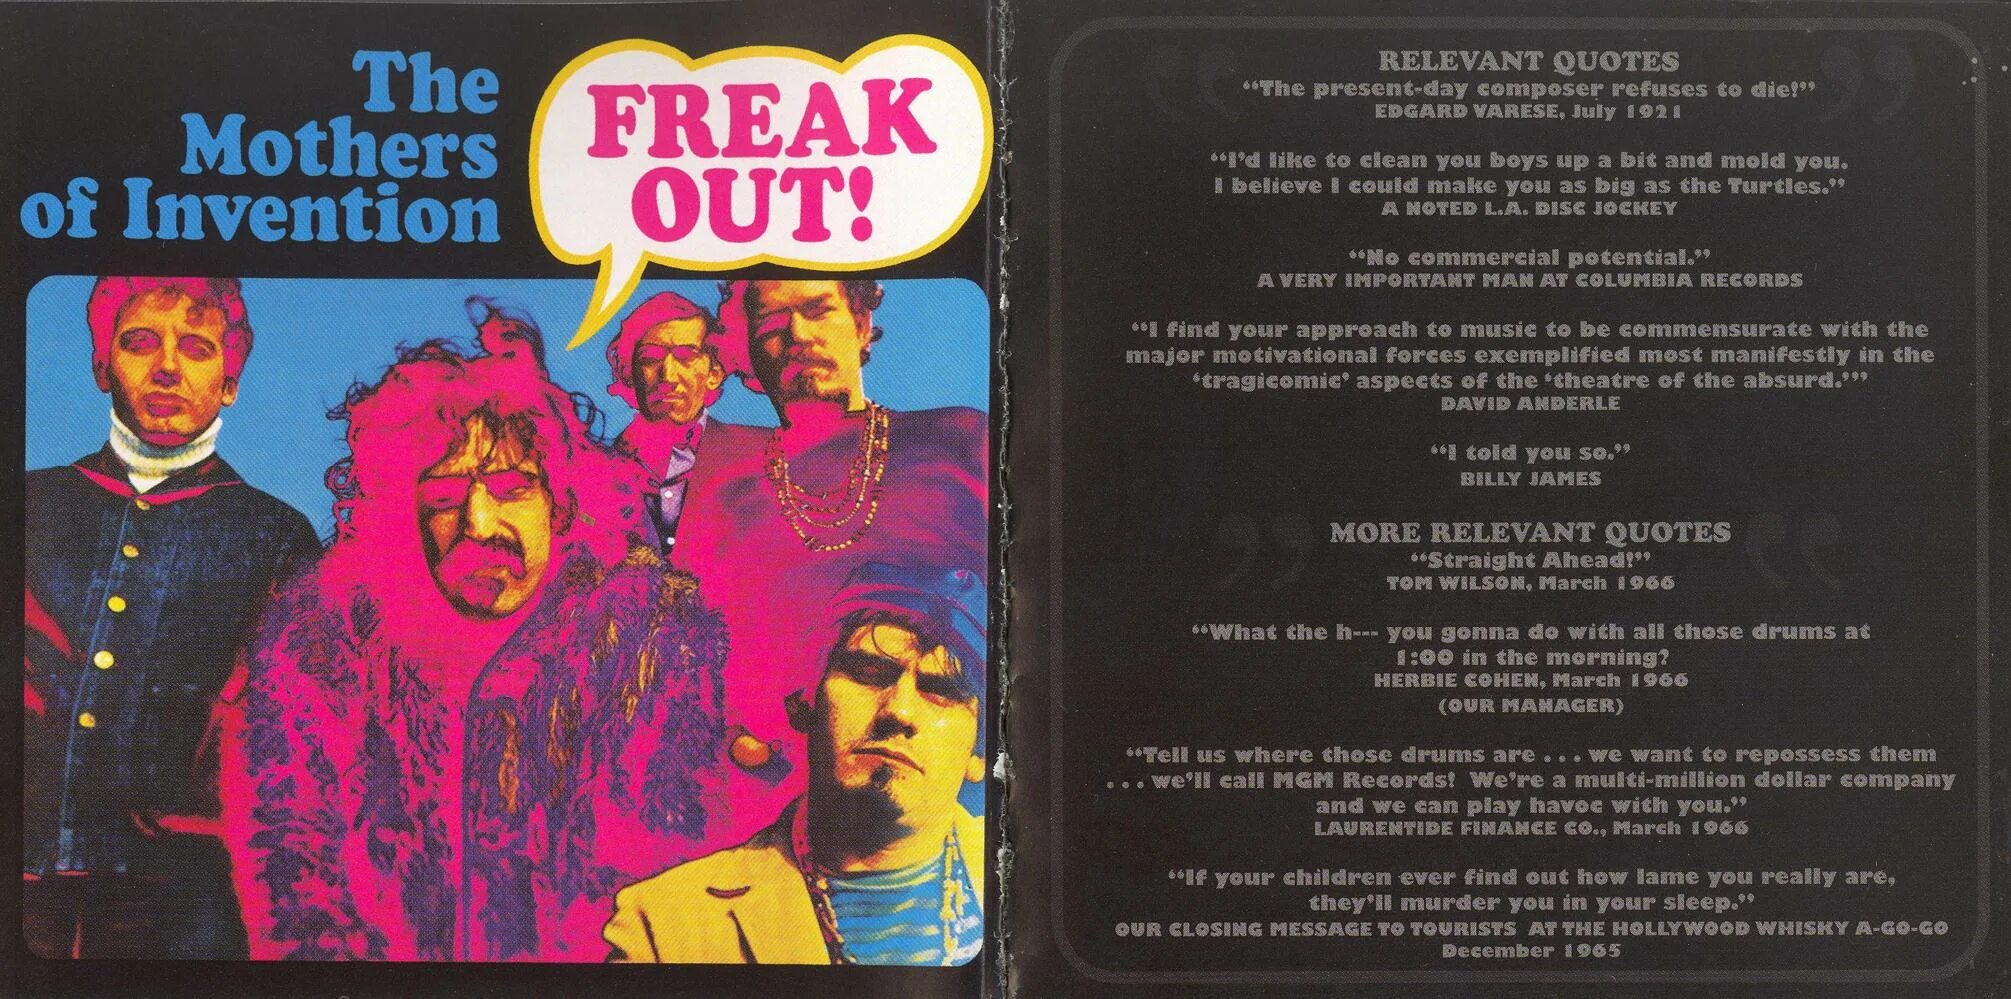 Frank Zappa Freak out. Frank Zappa Freak out LP. Freak out! The mothers of Invention. Альбом Freak out! (1966).